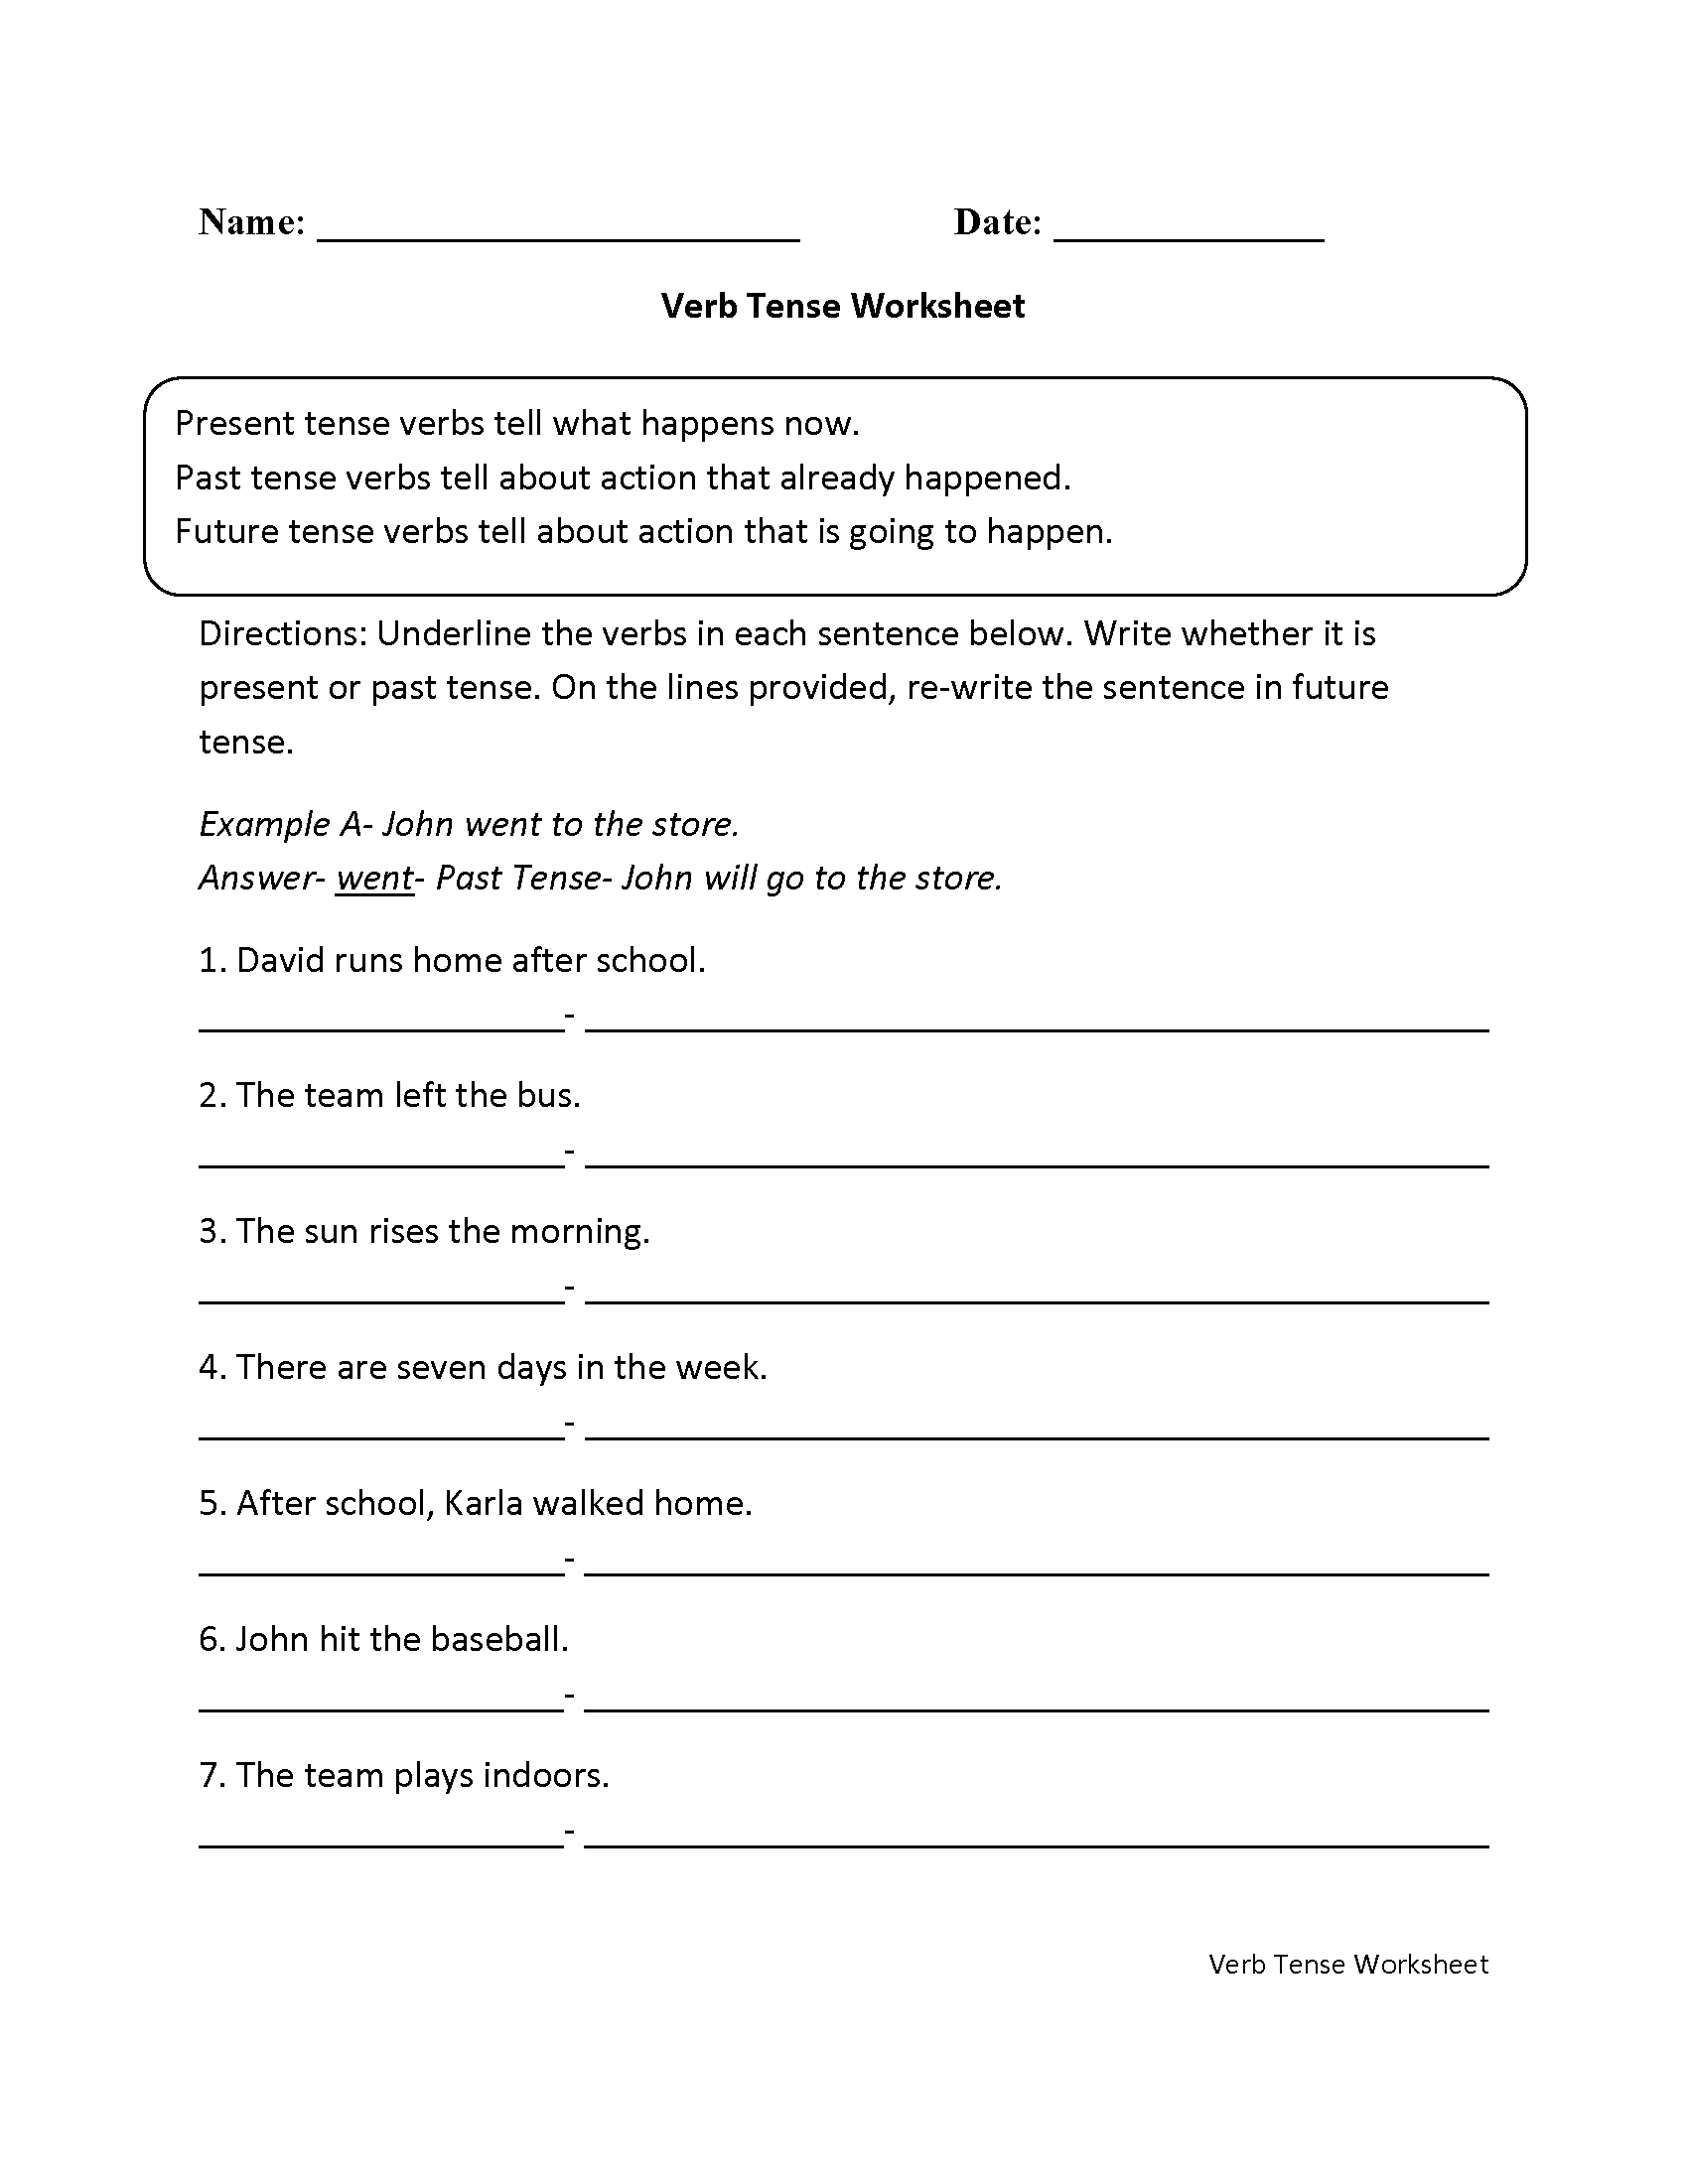 Verb Tense Worksheet Answers For Grade 5